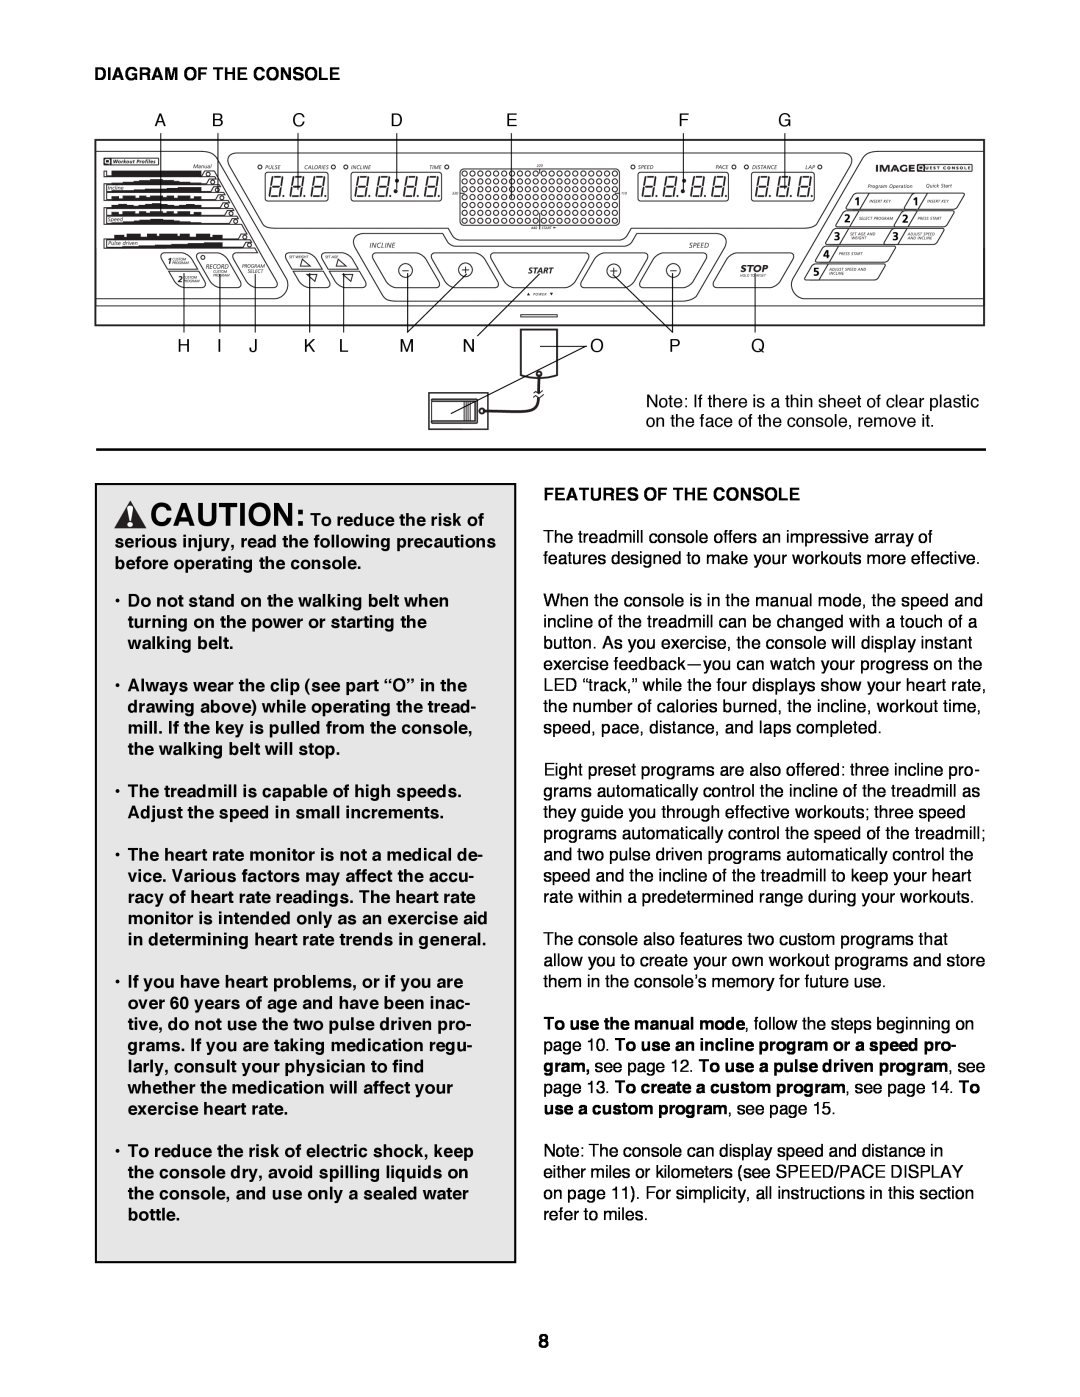 Image 831.297572 user manual Diagram Of The Console, Features Of The Console 